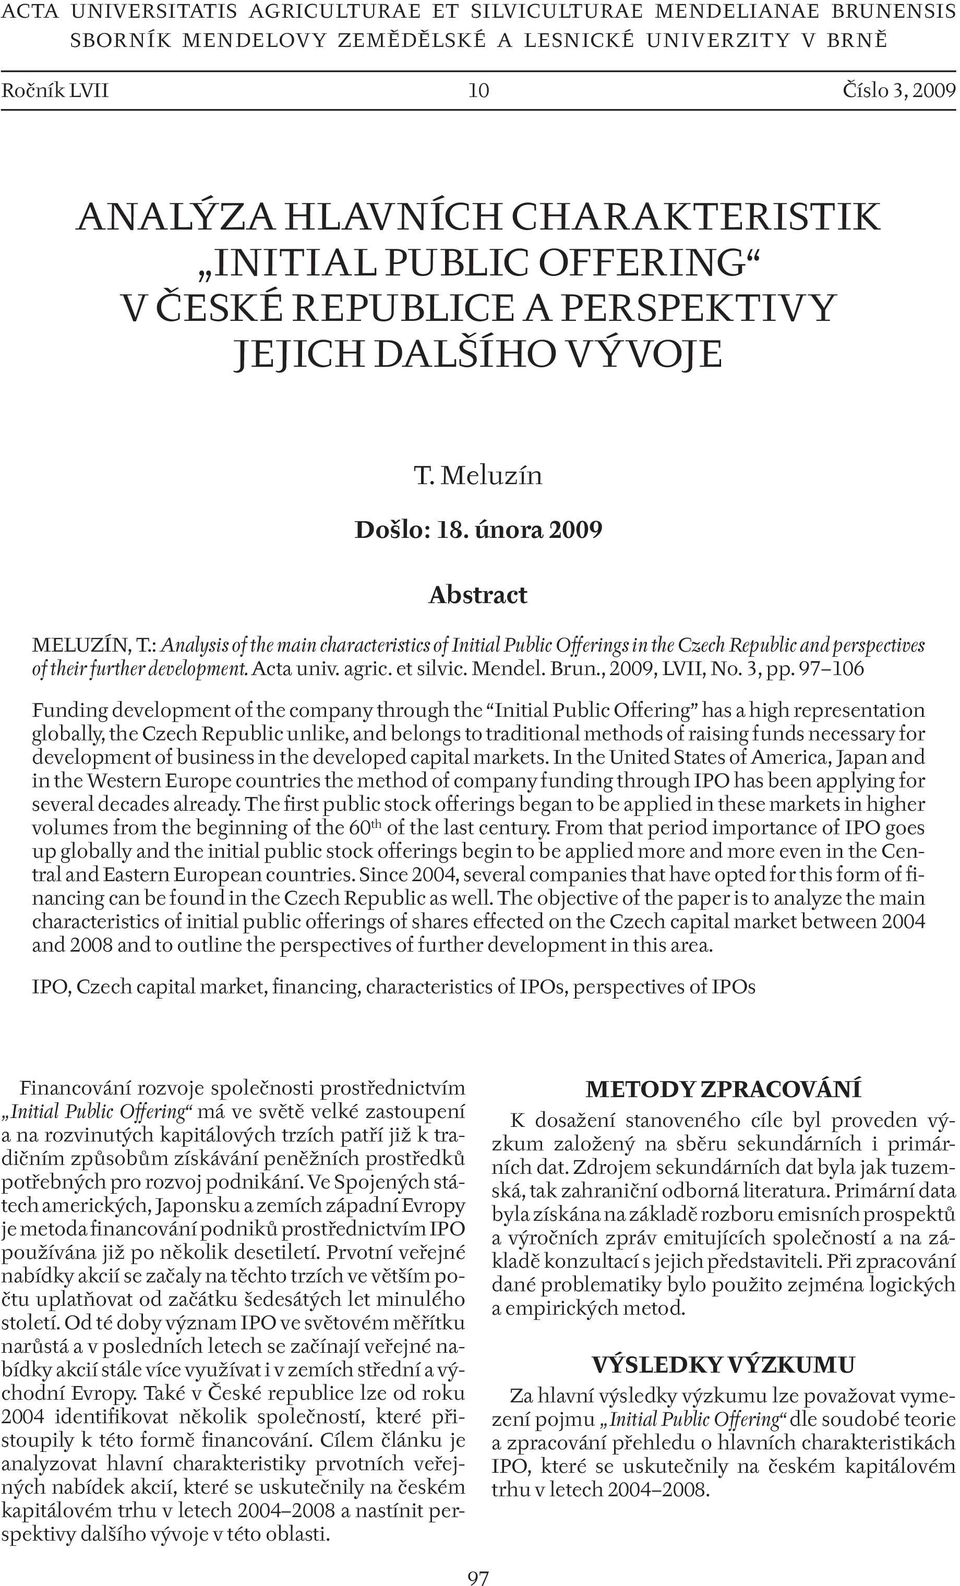 : Analysis of the main characteristics of Initial Public Offerings in the Czech Republic and perspectives of their further development. Acta univ. agric. et silvic. Mendel. Brun., 2009, LVII, No.